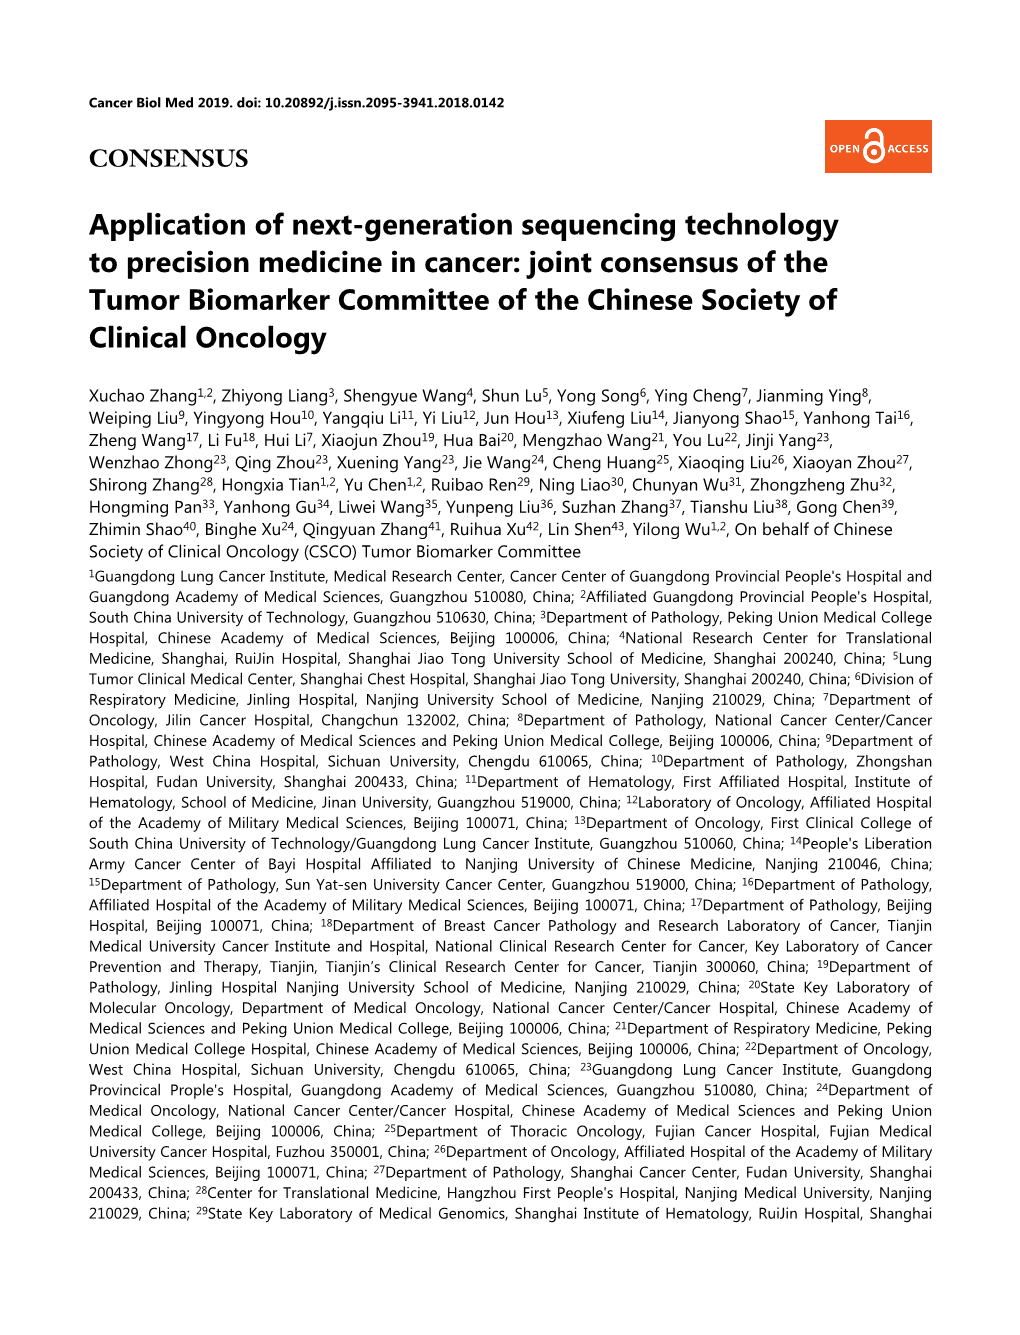 Application of Next-Generation Sequencing Technology to Precision